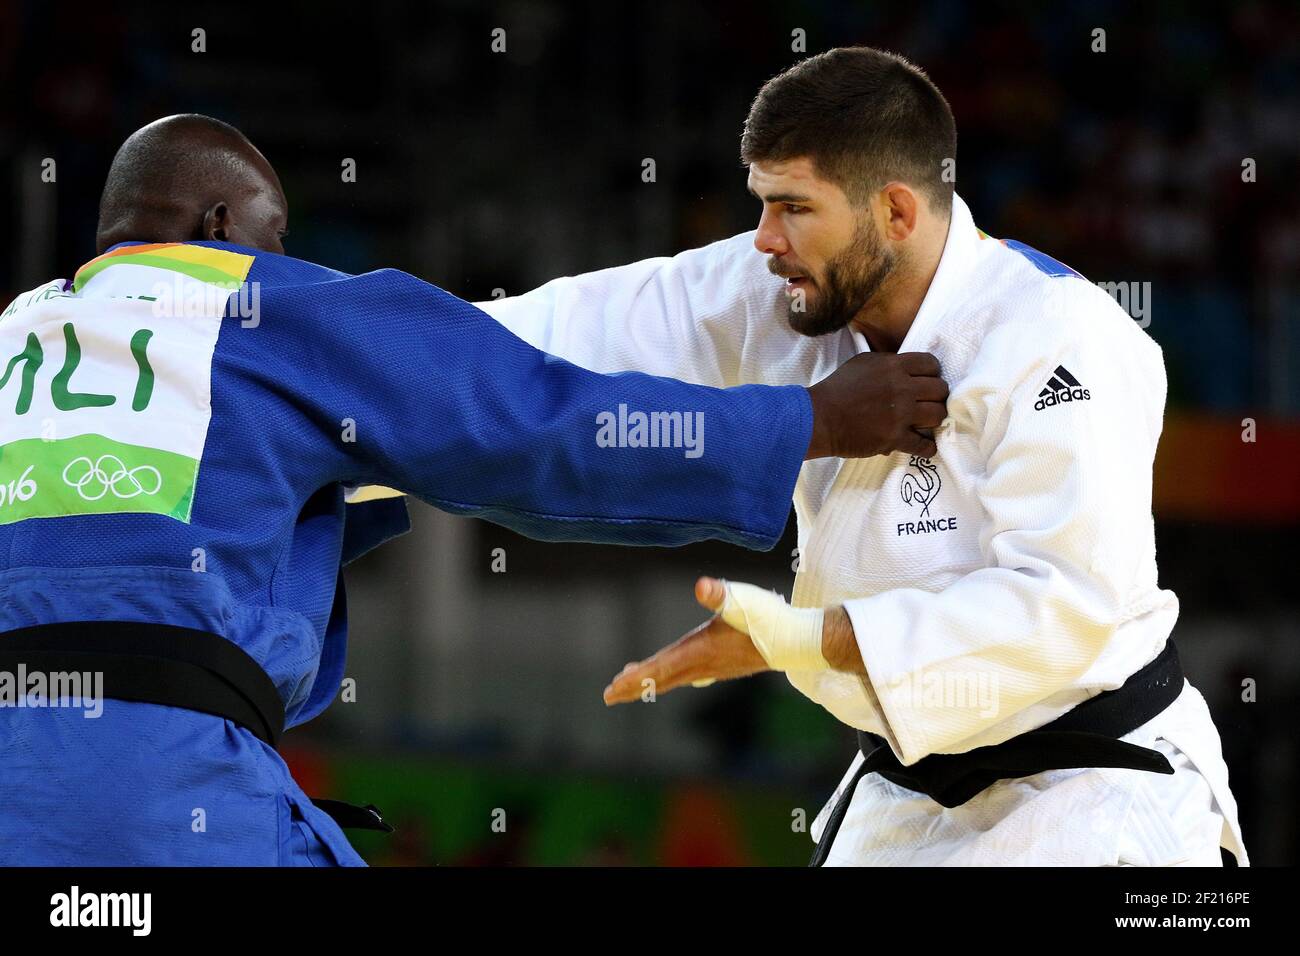 France s Cyrille Maret Judo Men s -100kg in action against A. Traore (MLI) during the Olympic Games RIO 2016, Judo, on August 11, 2016, in Rio, Brazil - Photo Eddy Lemaistre / KMSP / DPPI Stock Photo